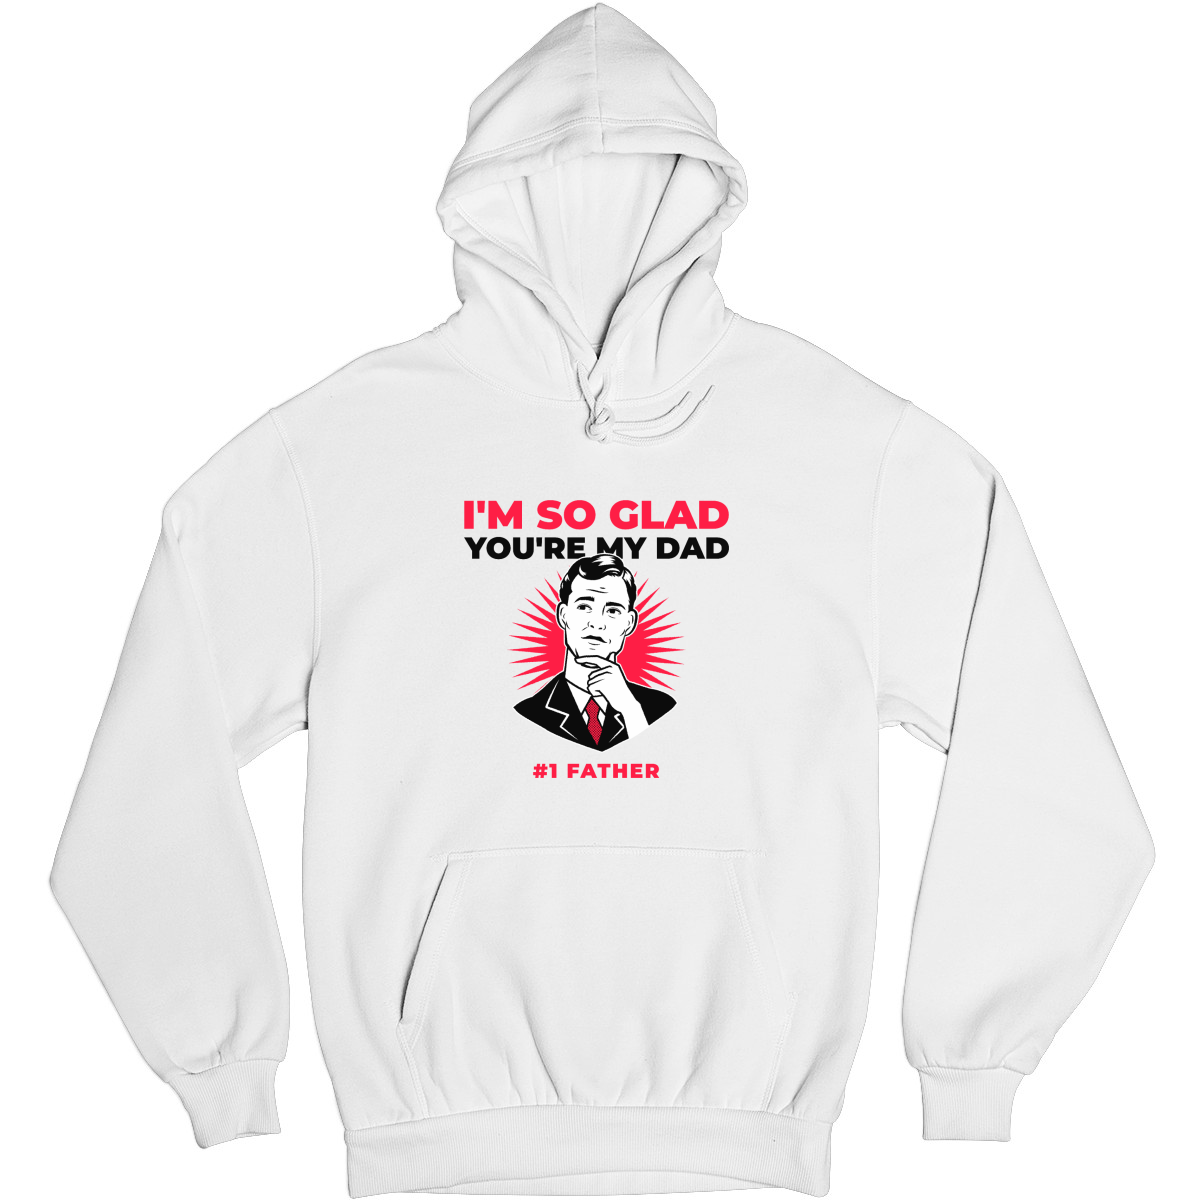 I'm so glad you are my dad Unisex Hoodie | White